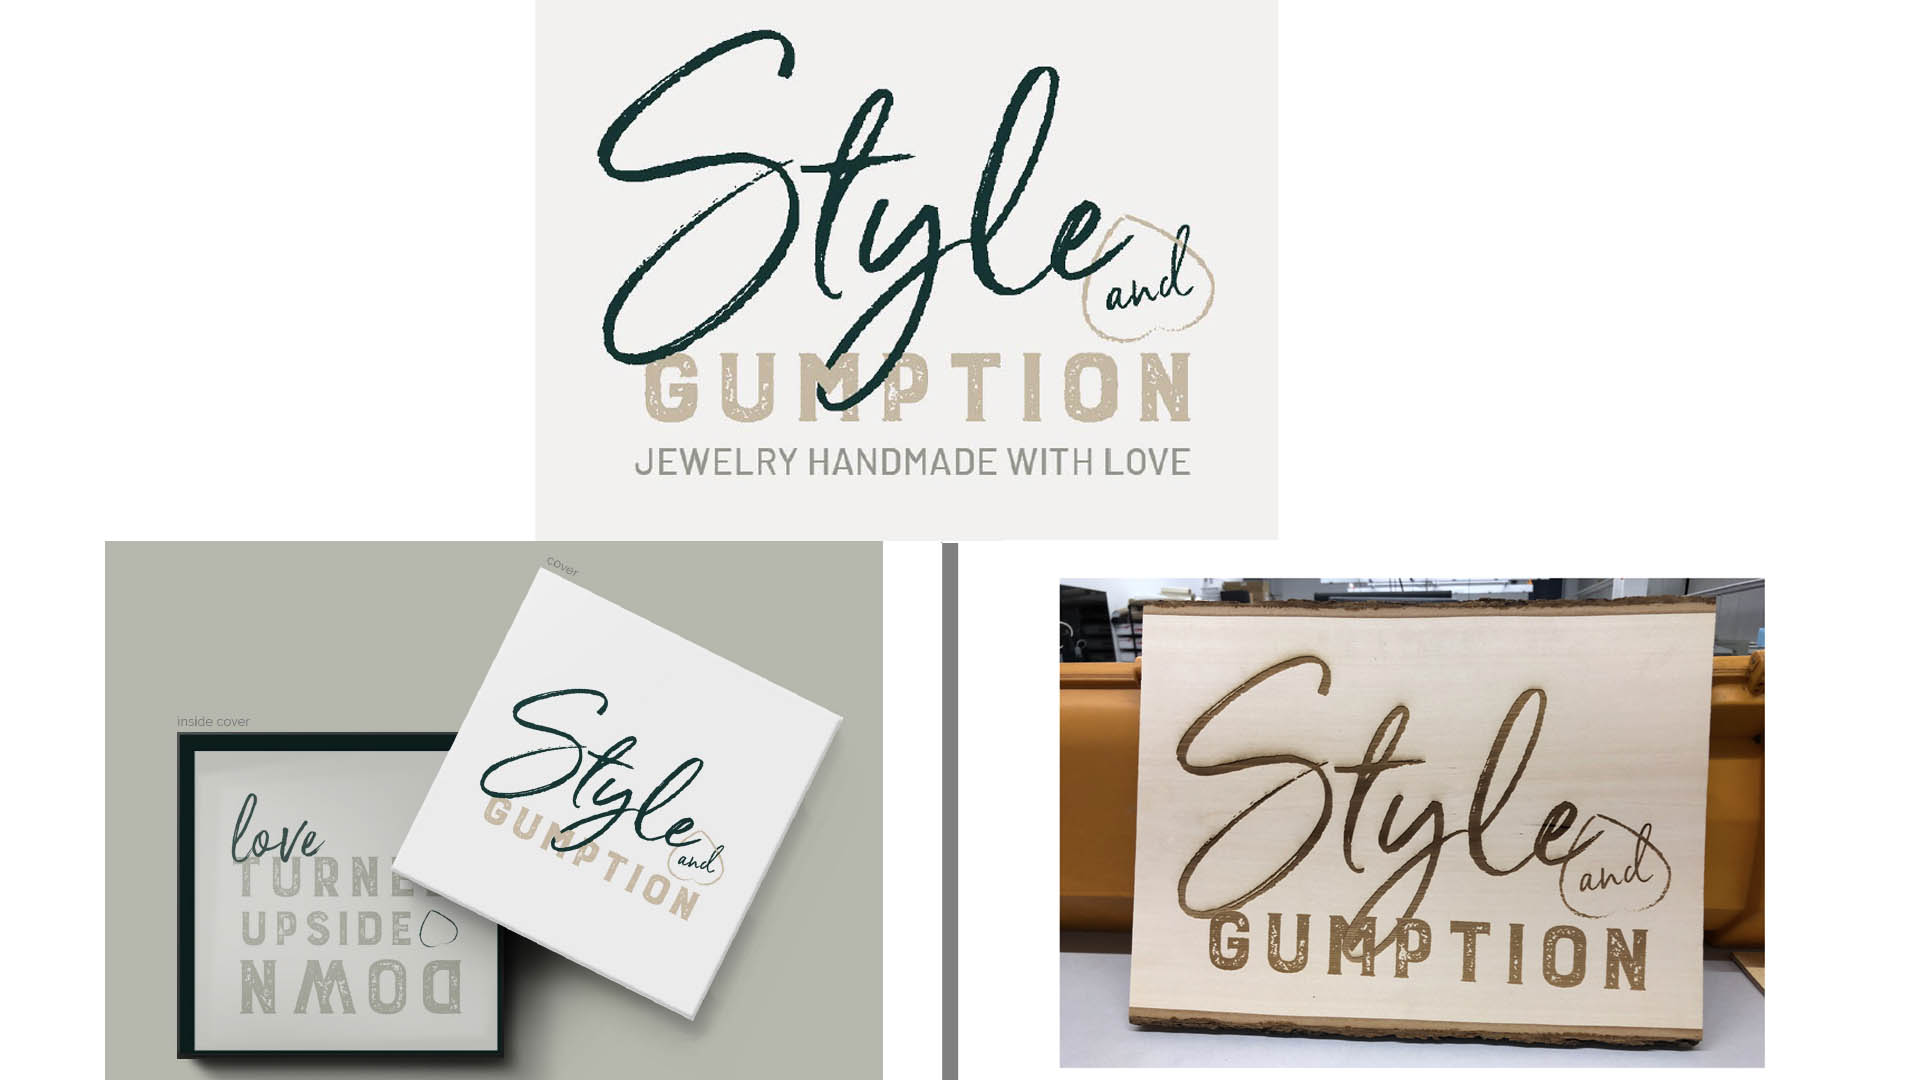 Nicole Accardi and Jaclyn Larsen rebranded marketing materials for Style & Gumption, locally designed jewelry.